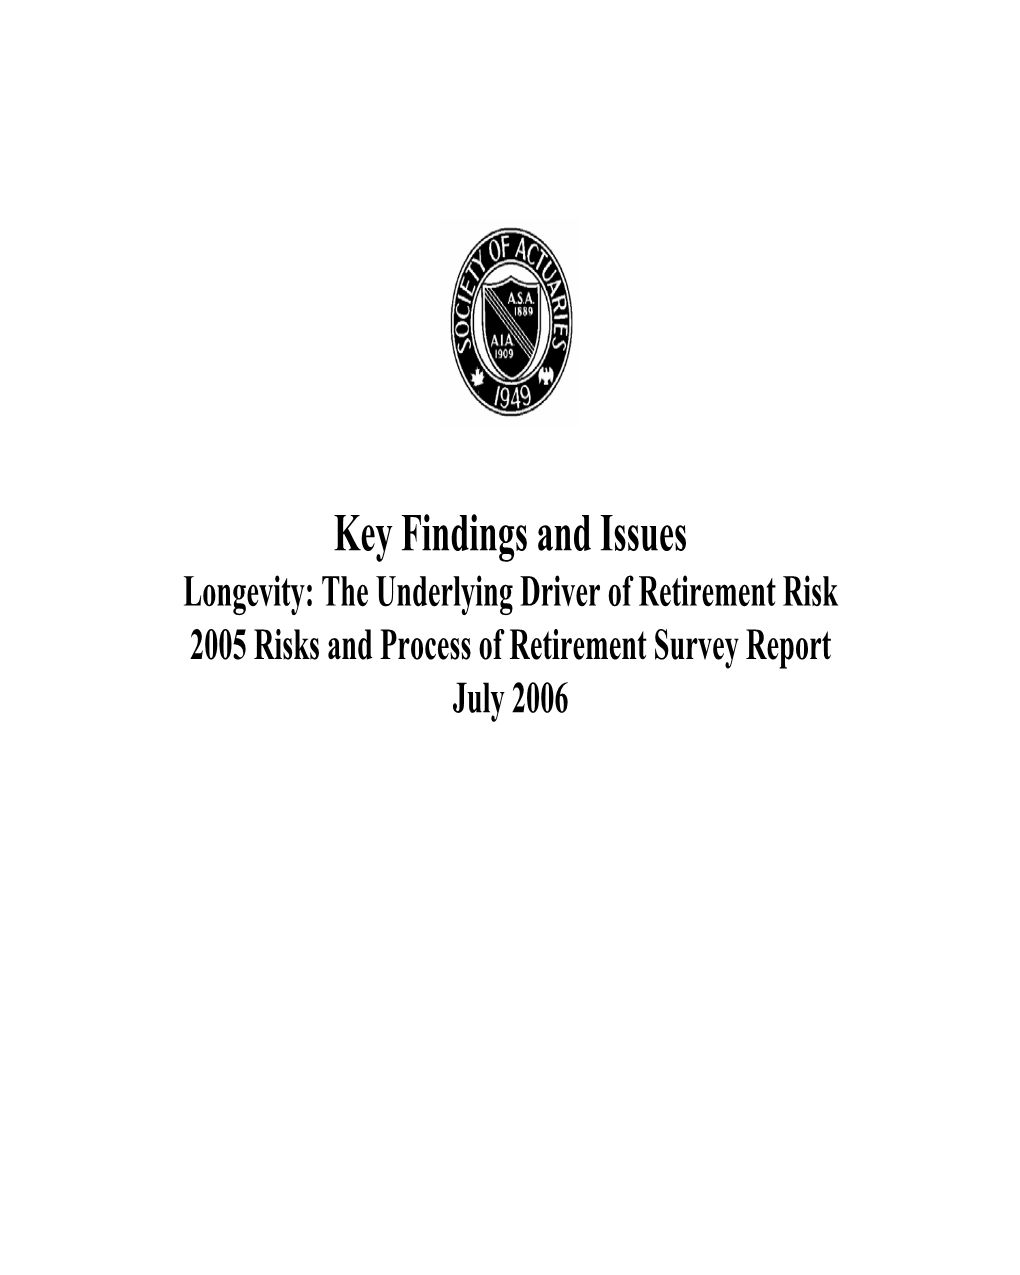 Key Findings and Issues–Longevity and Retirement Risk